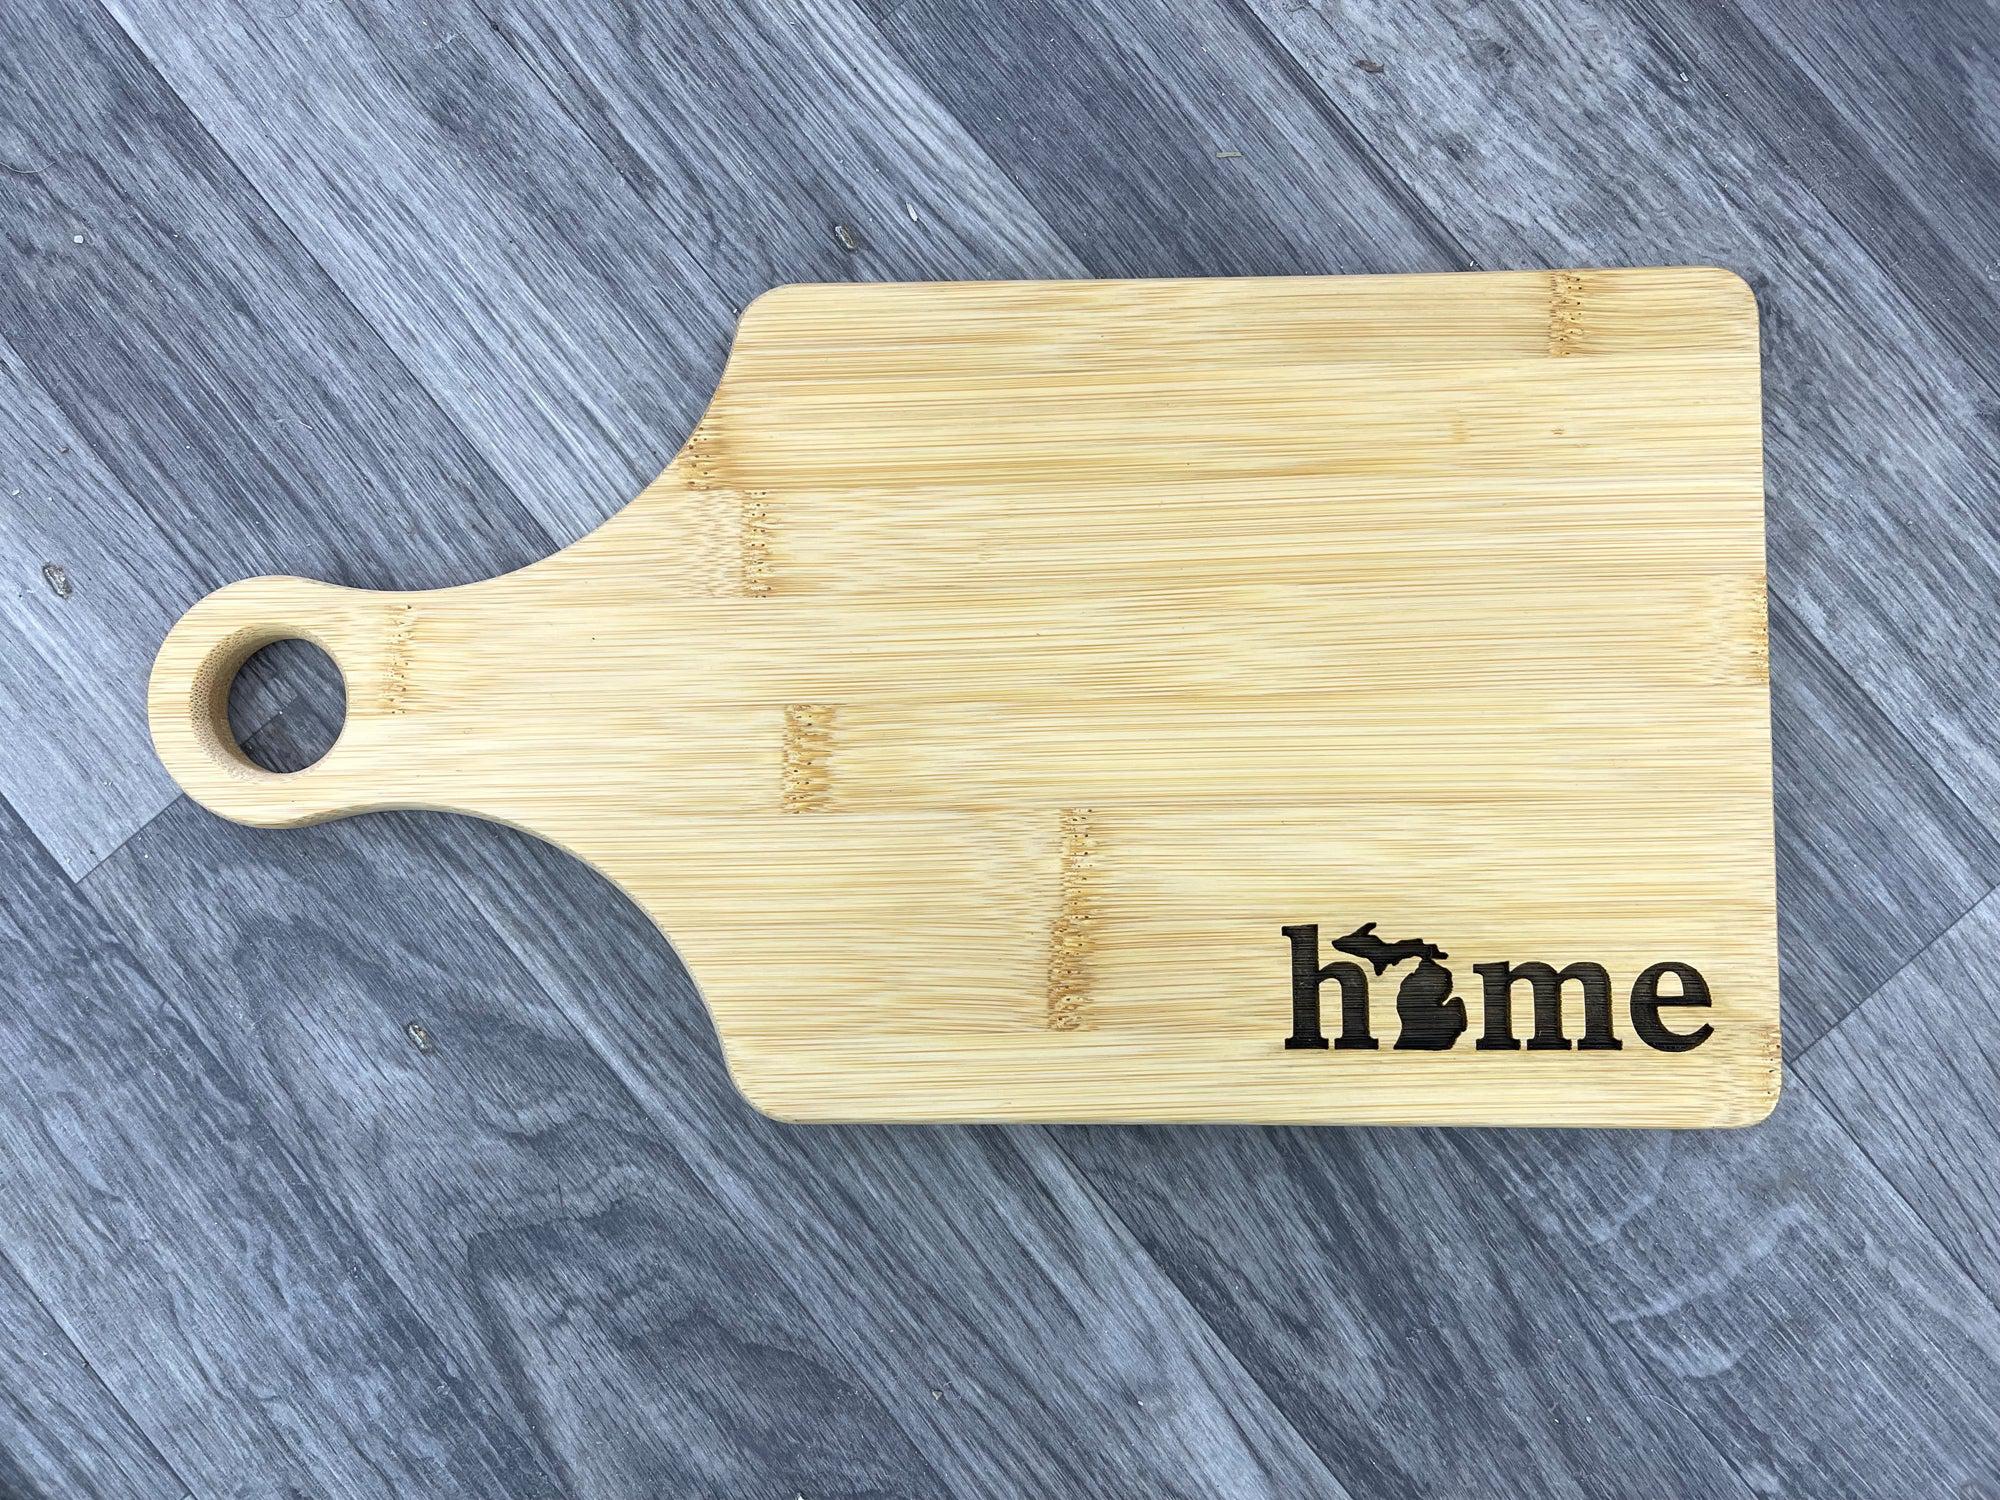 "Home" Small Wooden Engraved Cutting Board